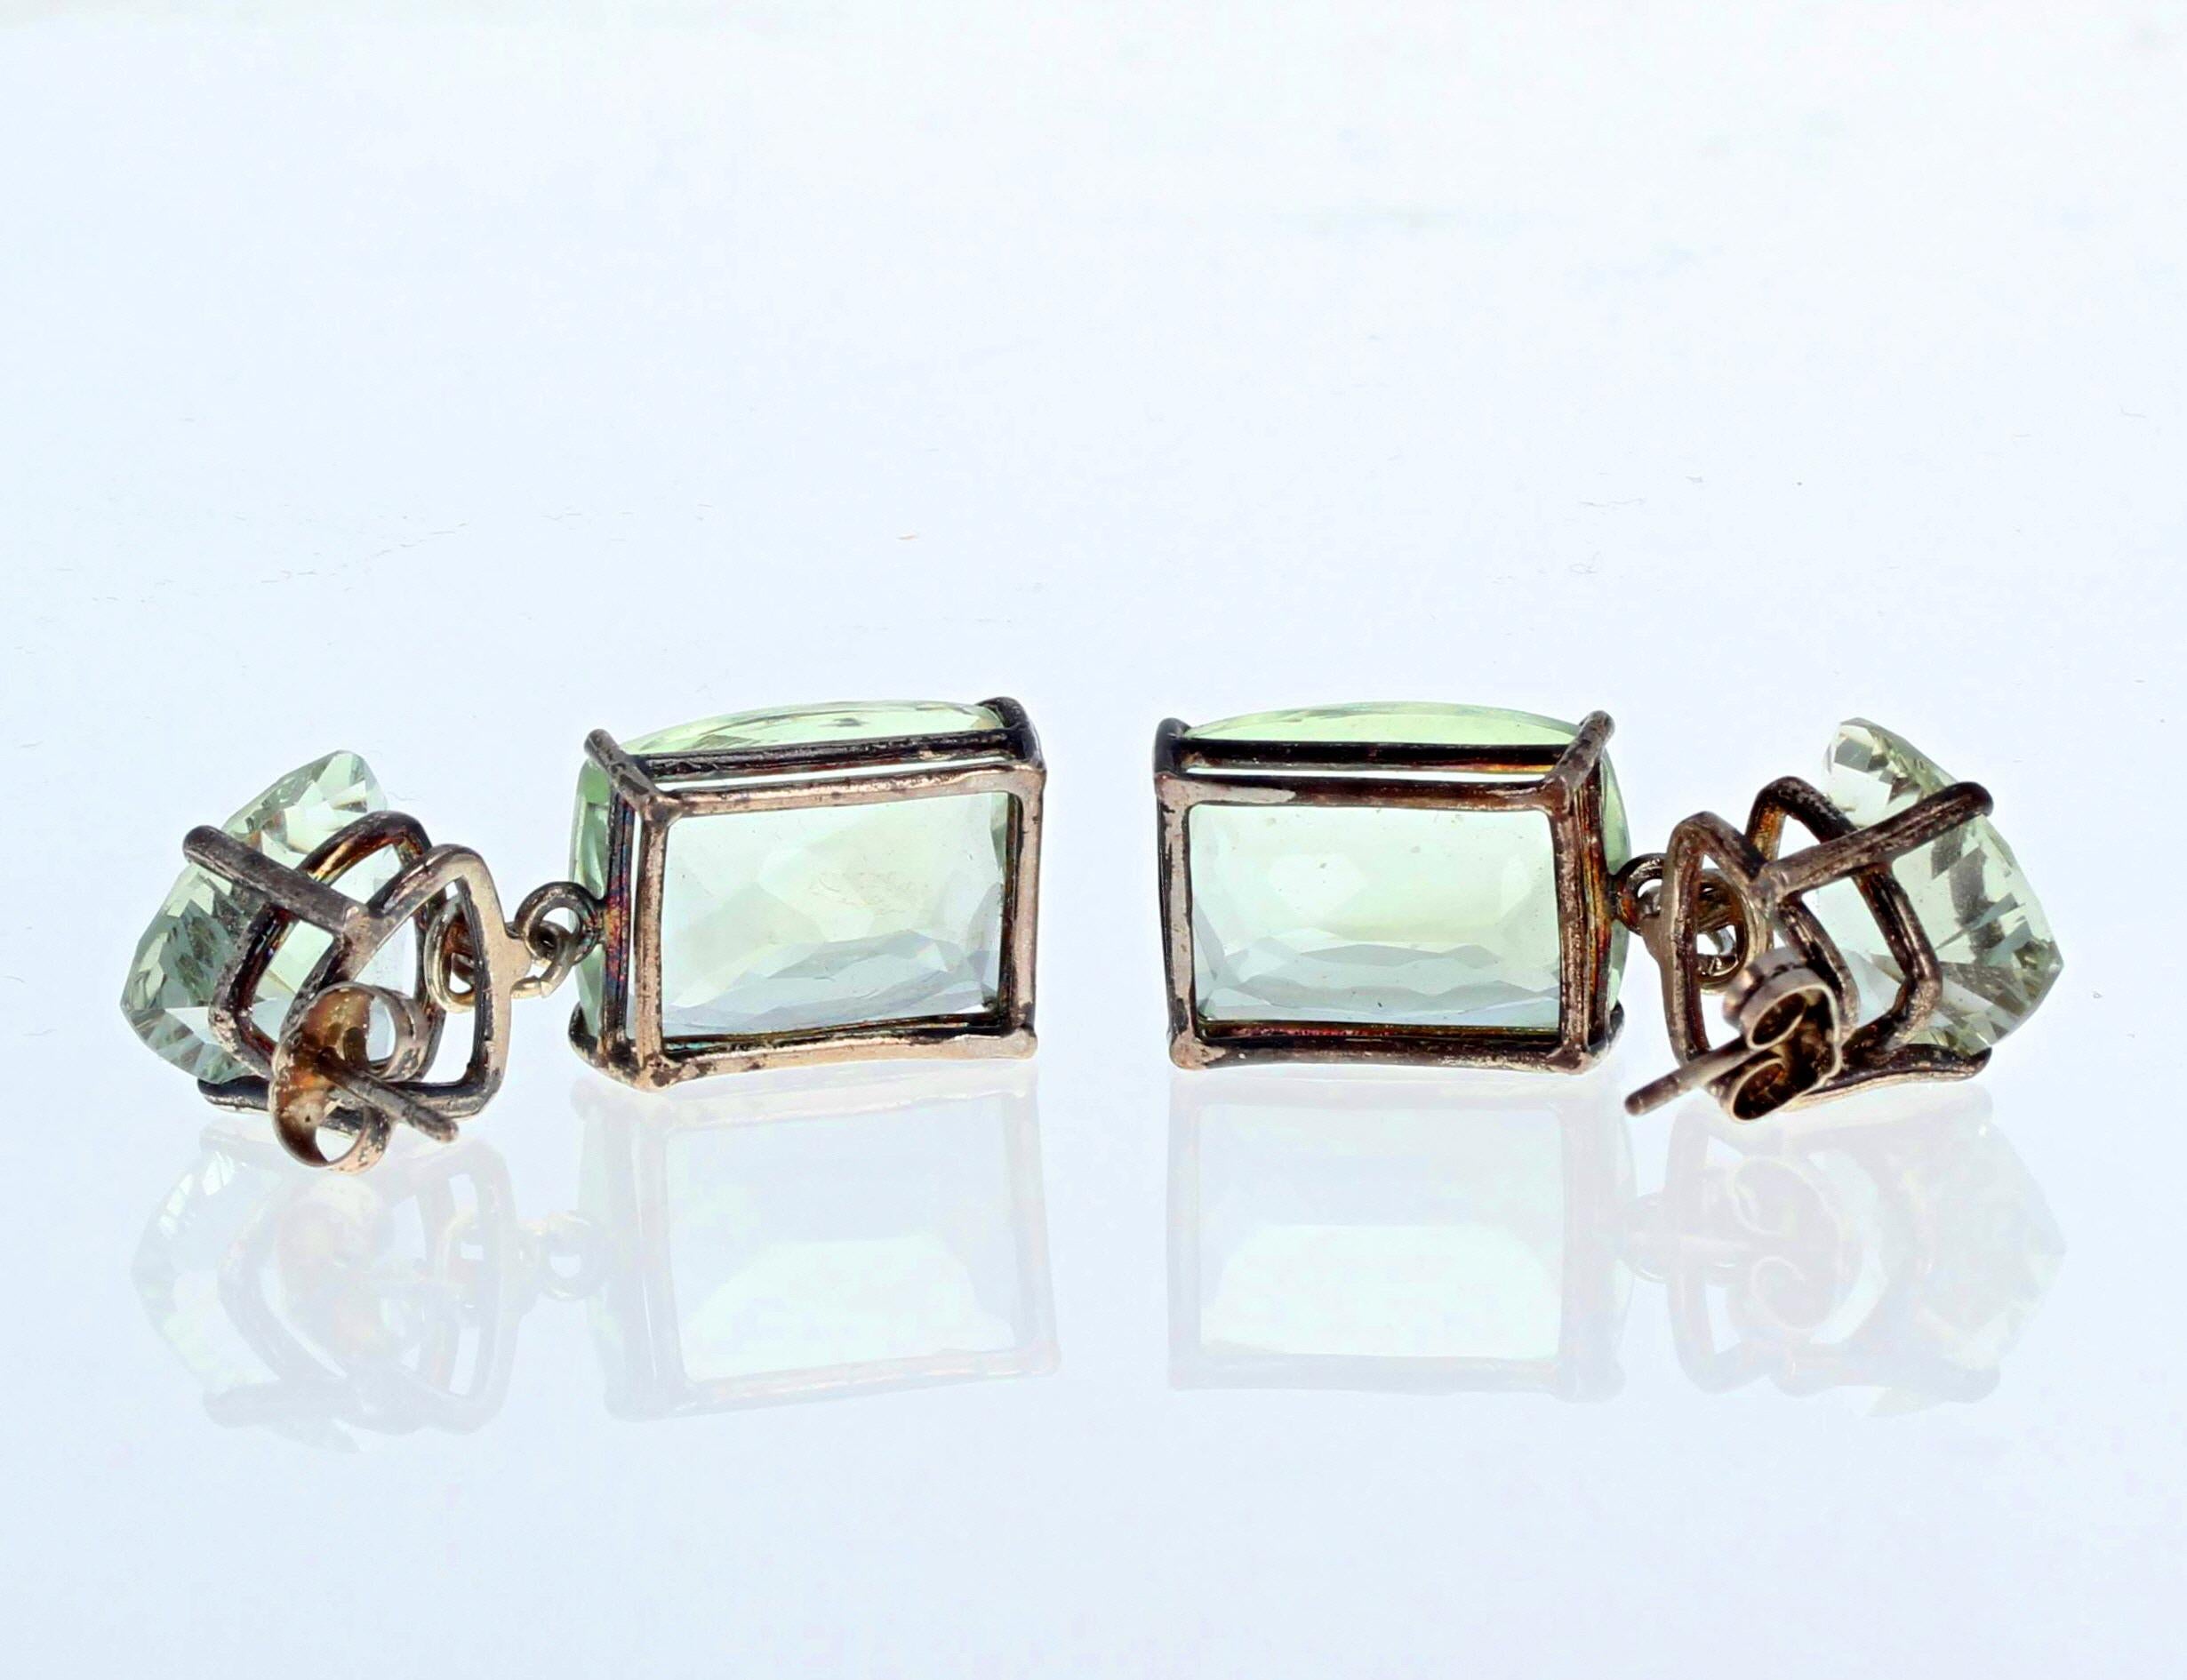 AJD Intensely Brilliant Natural Praziolite & Praziolite Stud Earrings  In New Condition For Sale In Raleigh, NC